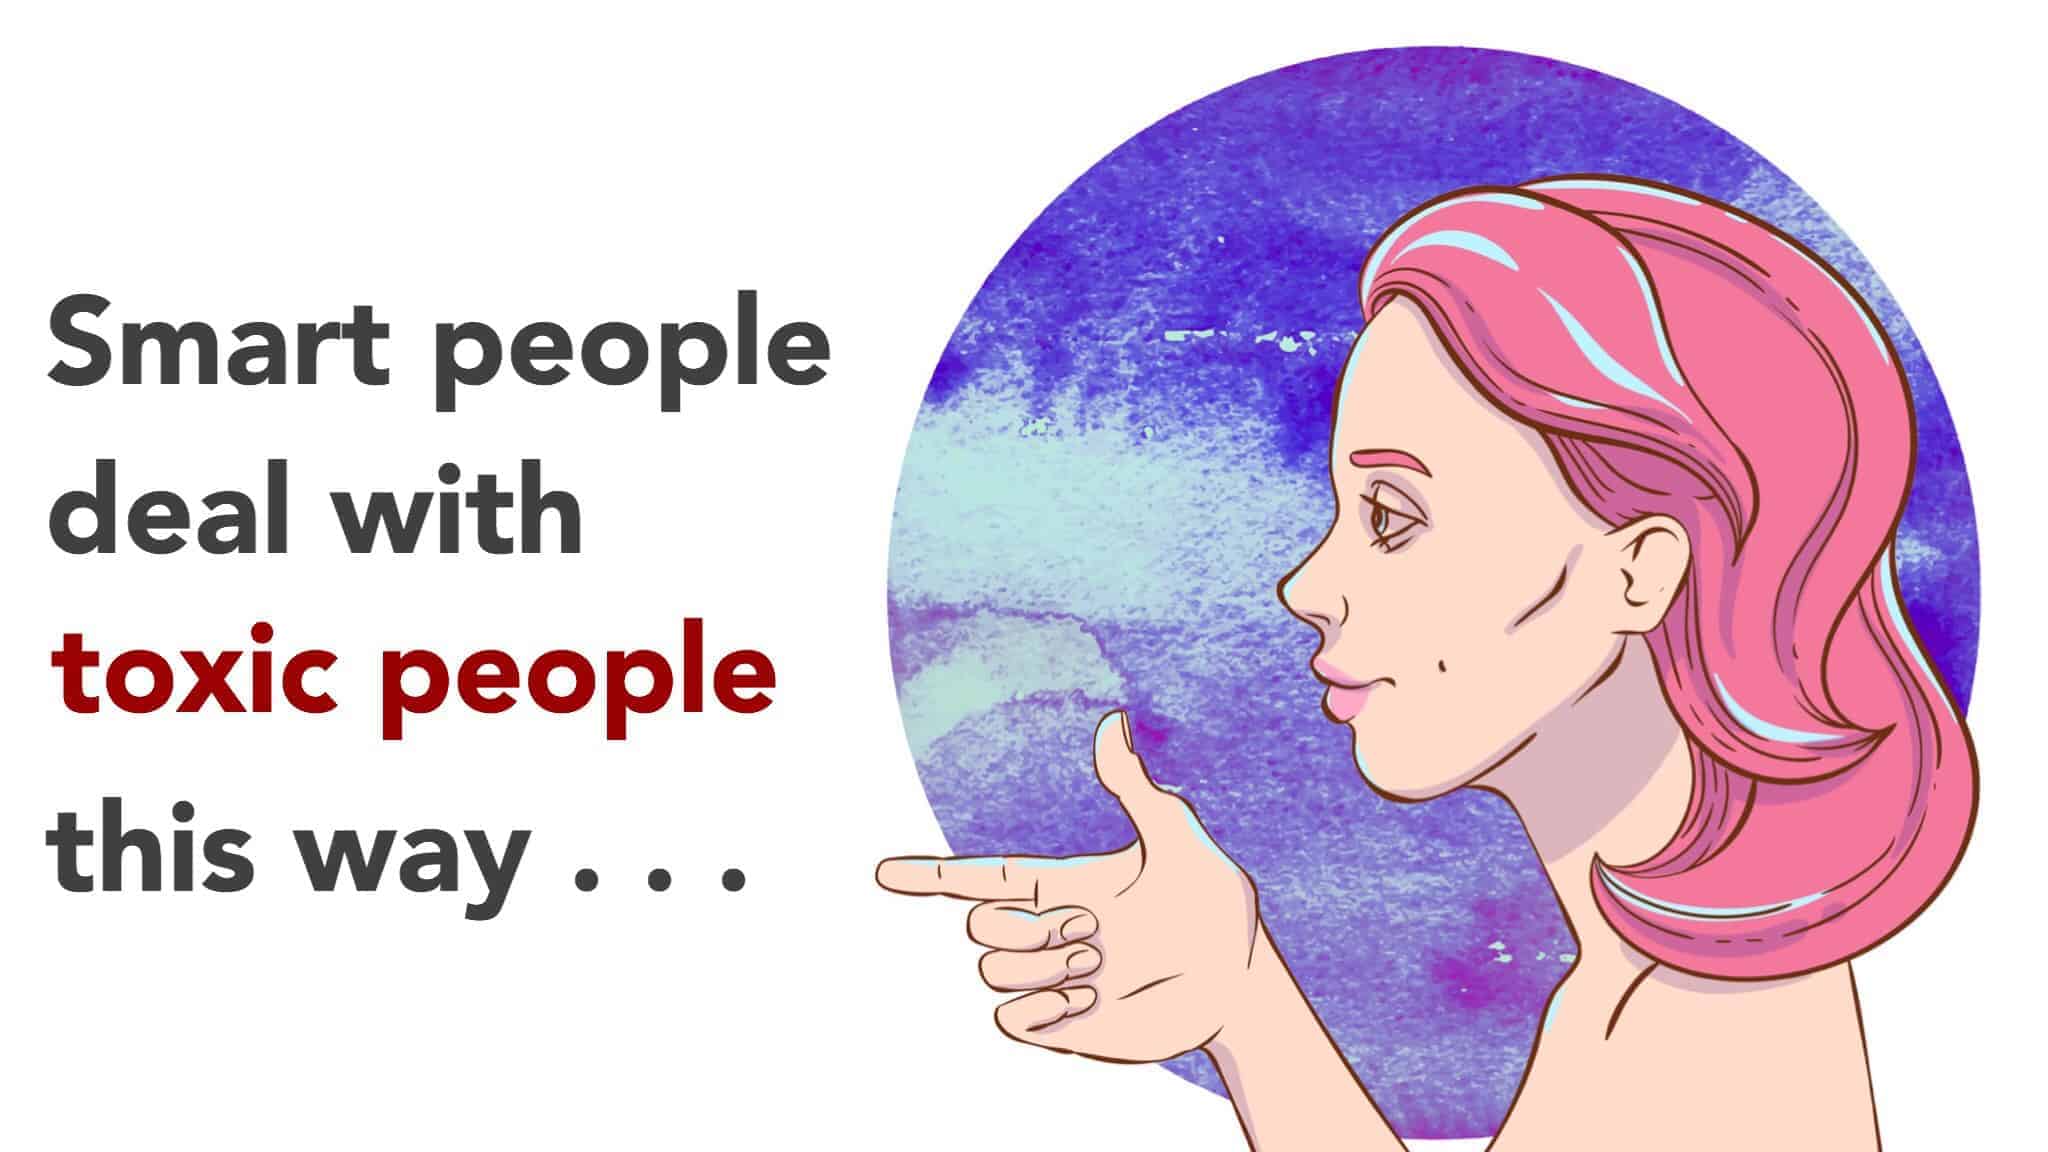 Toxic people are what Toxic People: